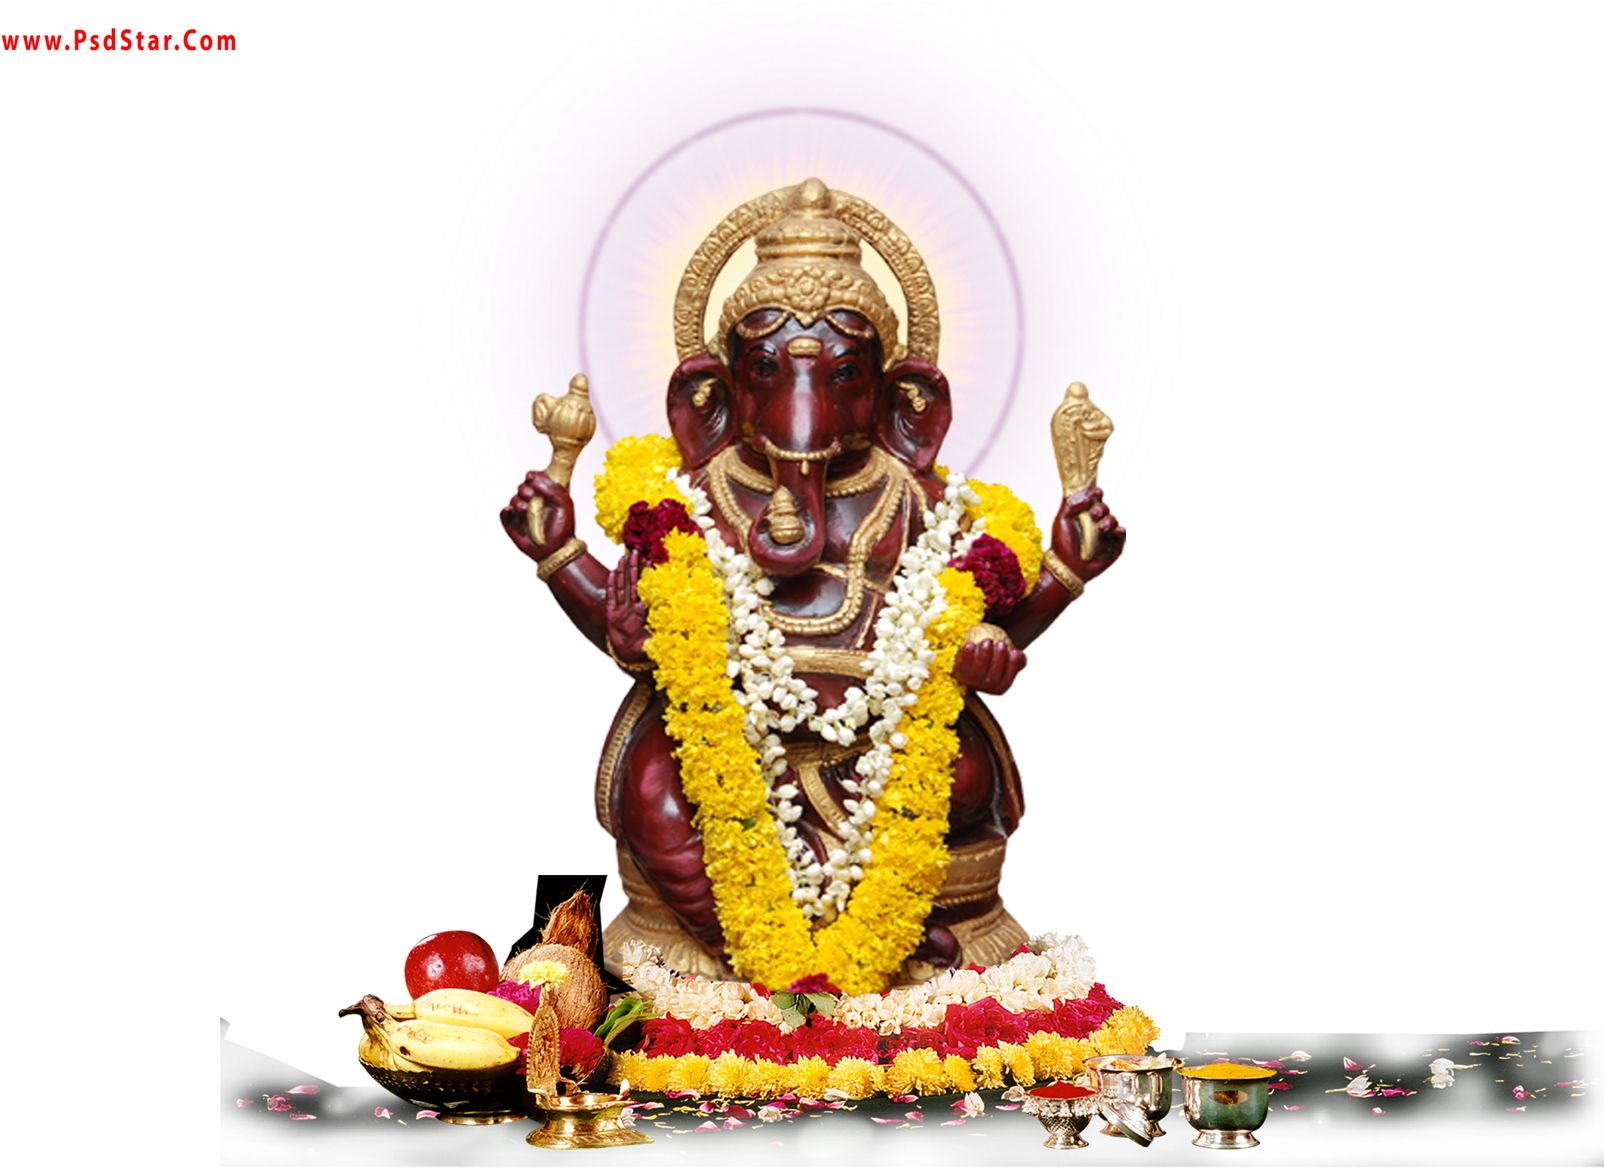 Lord Ganesh Statue Decoratedwith Flowers